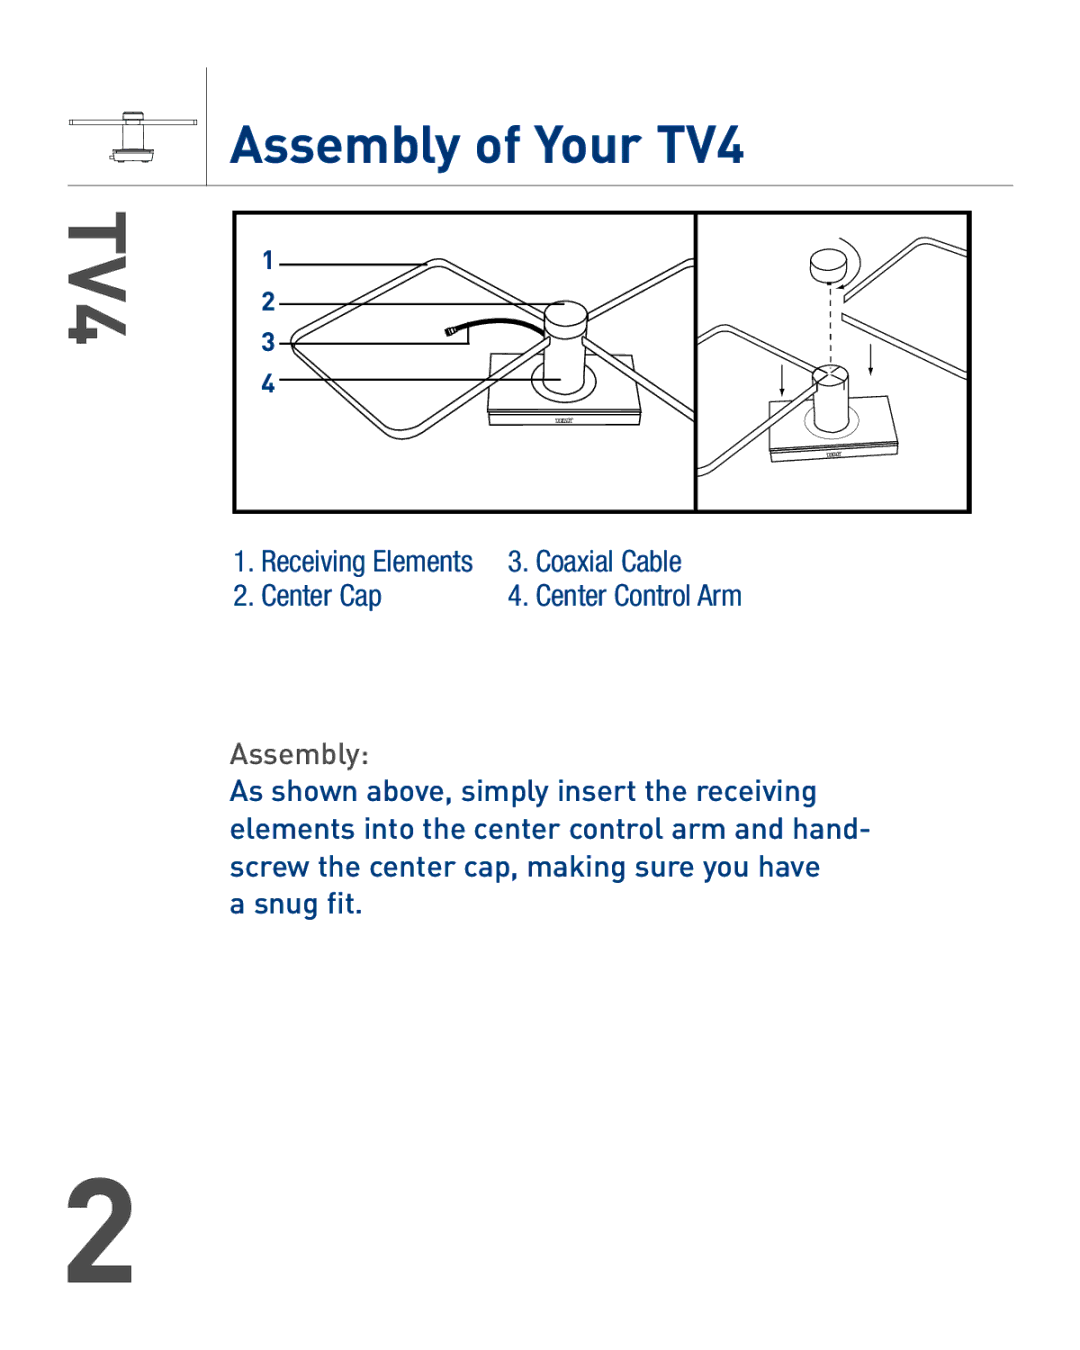 Audiovox owner manual Assembly of Your TV4 